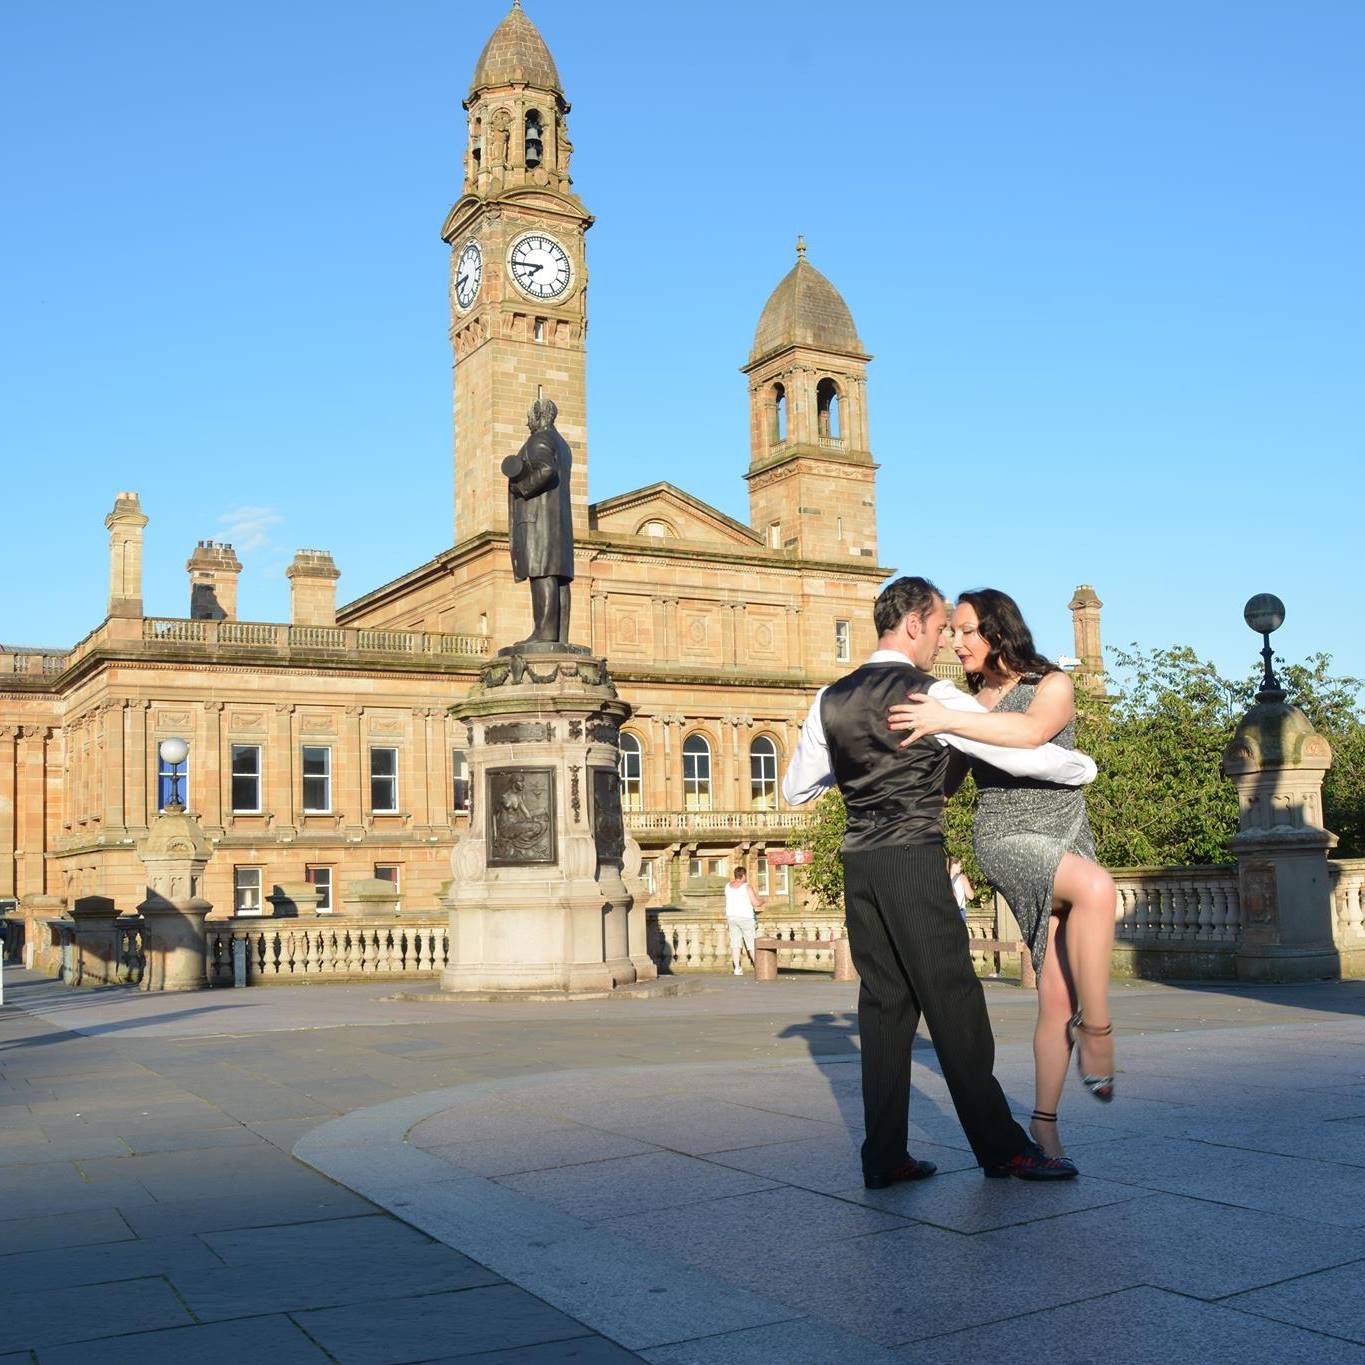 Drew & Taryn dancing in Paisley with the Town Hall in background.